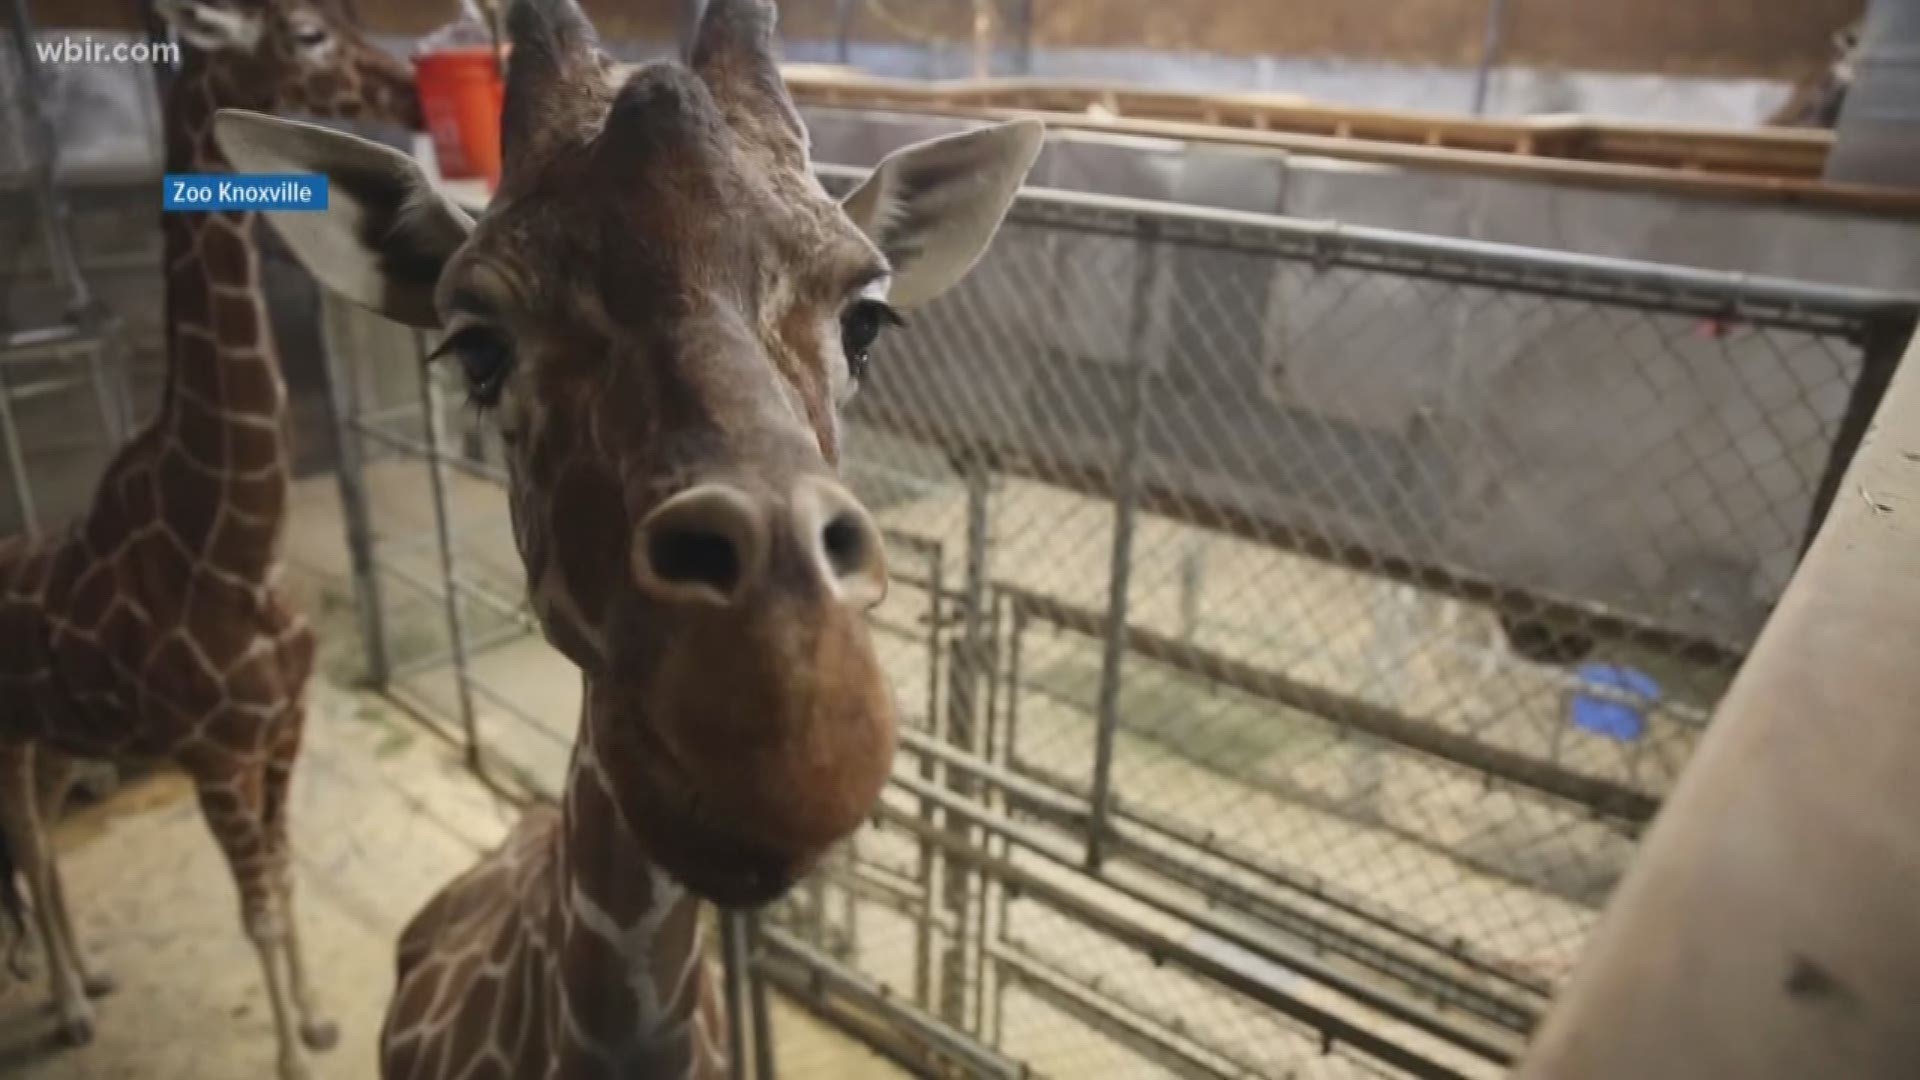 The staff at Zoo Knoxville is preparing to say goodbye to an old friend.